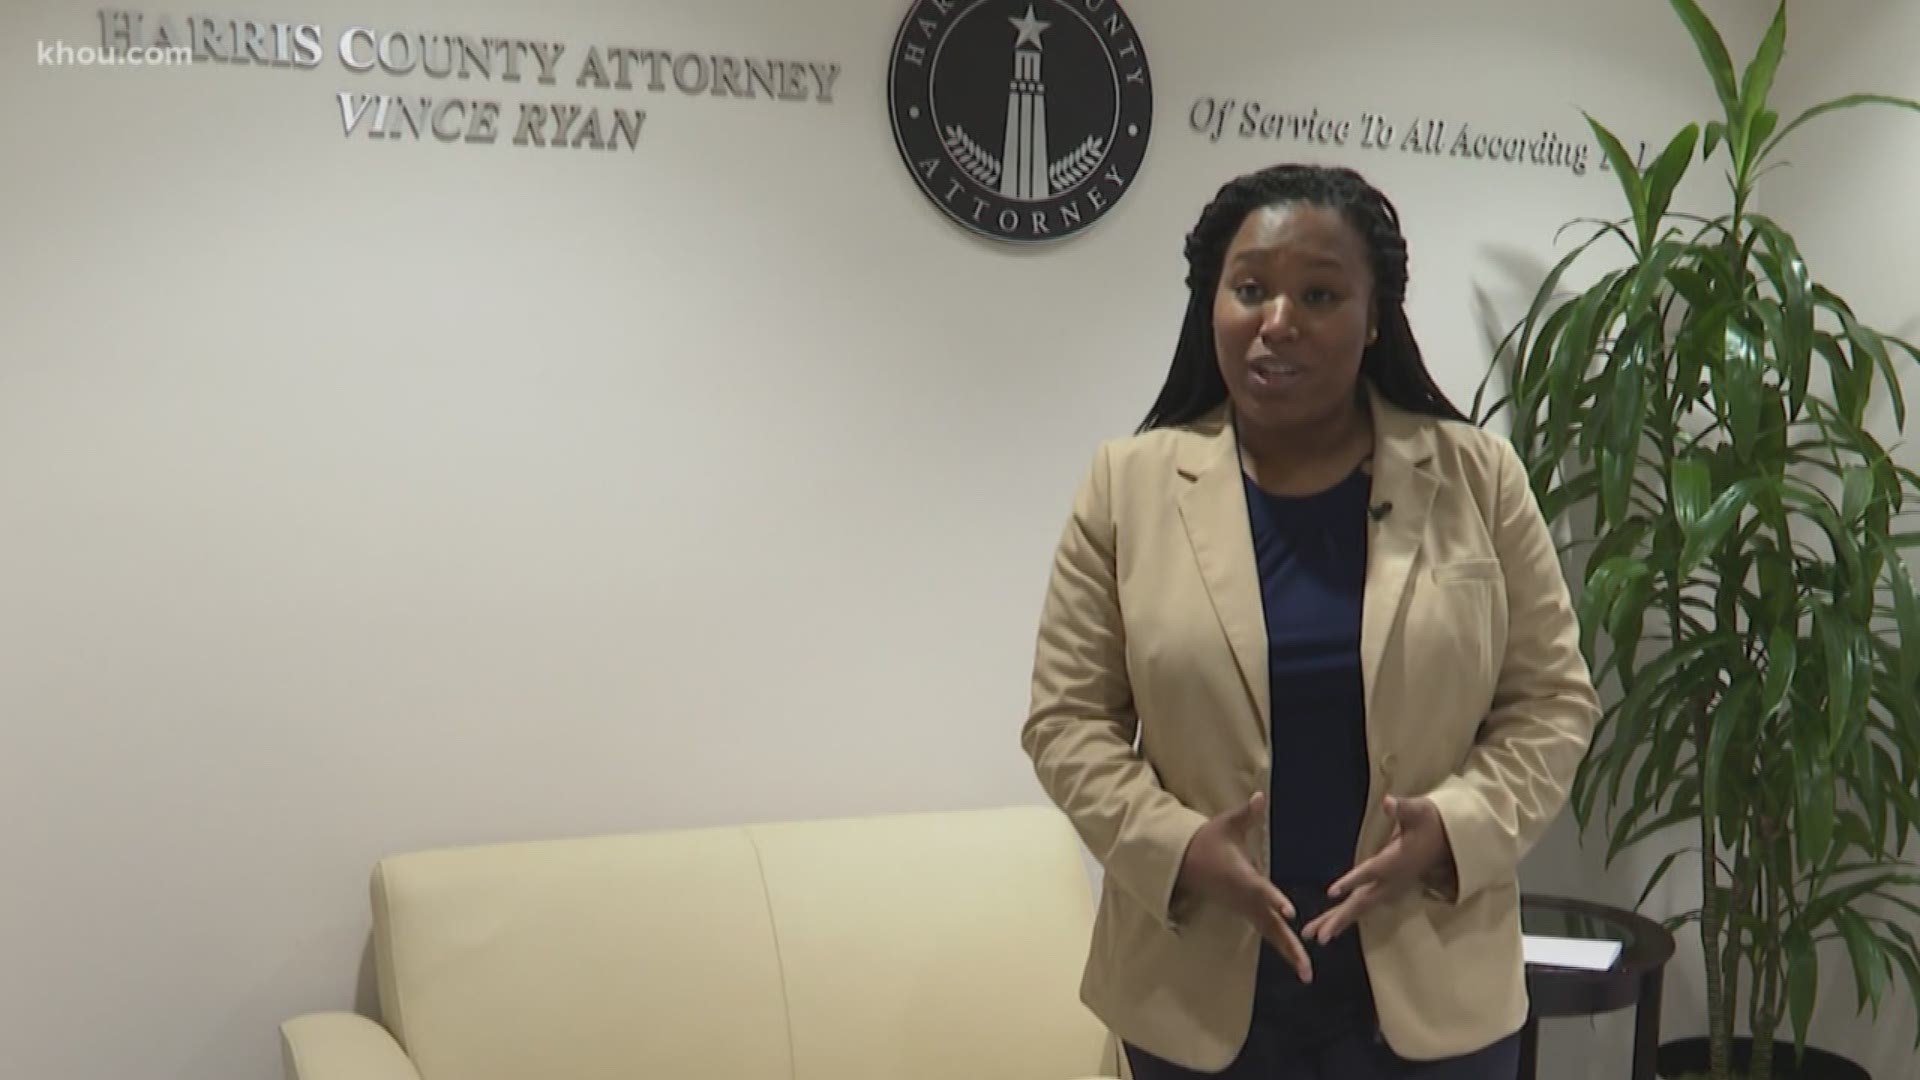 A mother of five whose graduation pictures with her kids went viral is now working as a Harris County attorney.